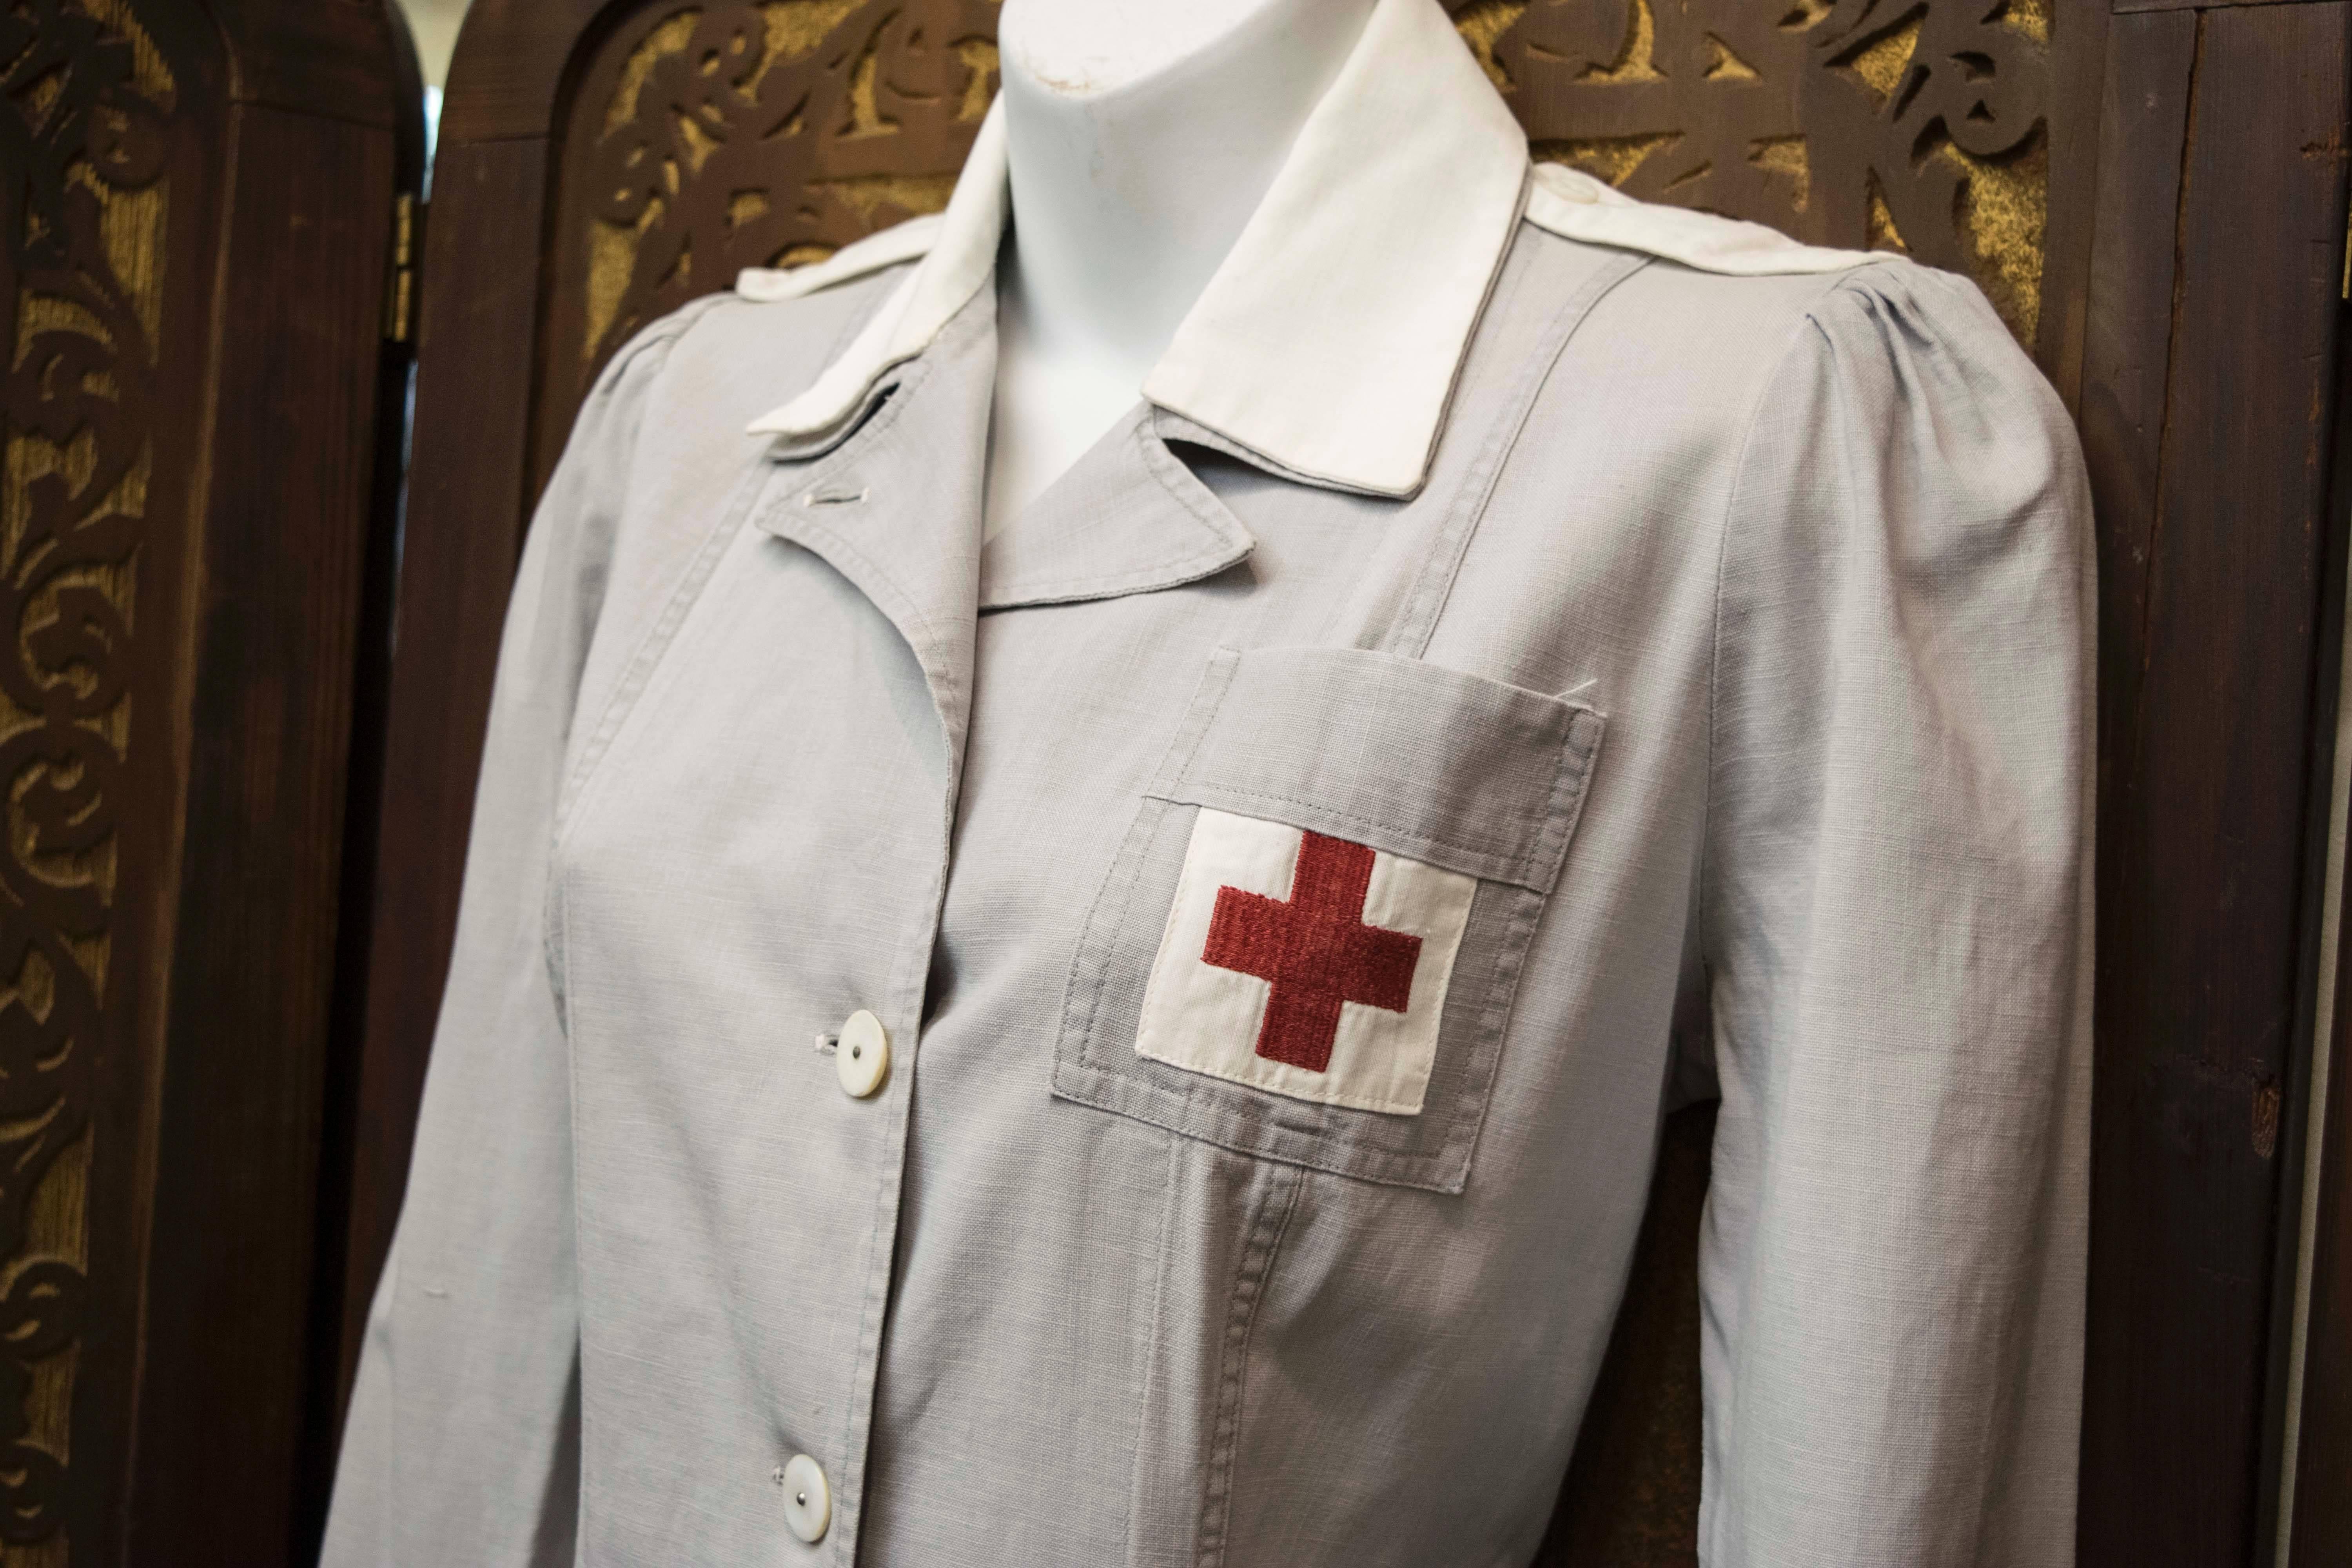 Pre WW2 Nurses Uniform. 
Beautifully preserved 1930s Nurses uniform, with original shell buttons and detachable epaulettes. Made from a cotton linen this piece has wonderful historical provenance as well as being a fabulous item to wear. 

B